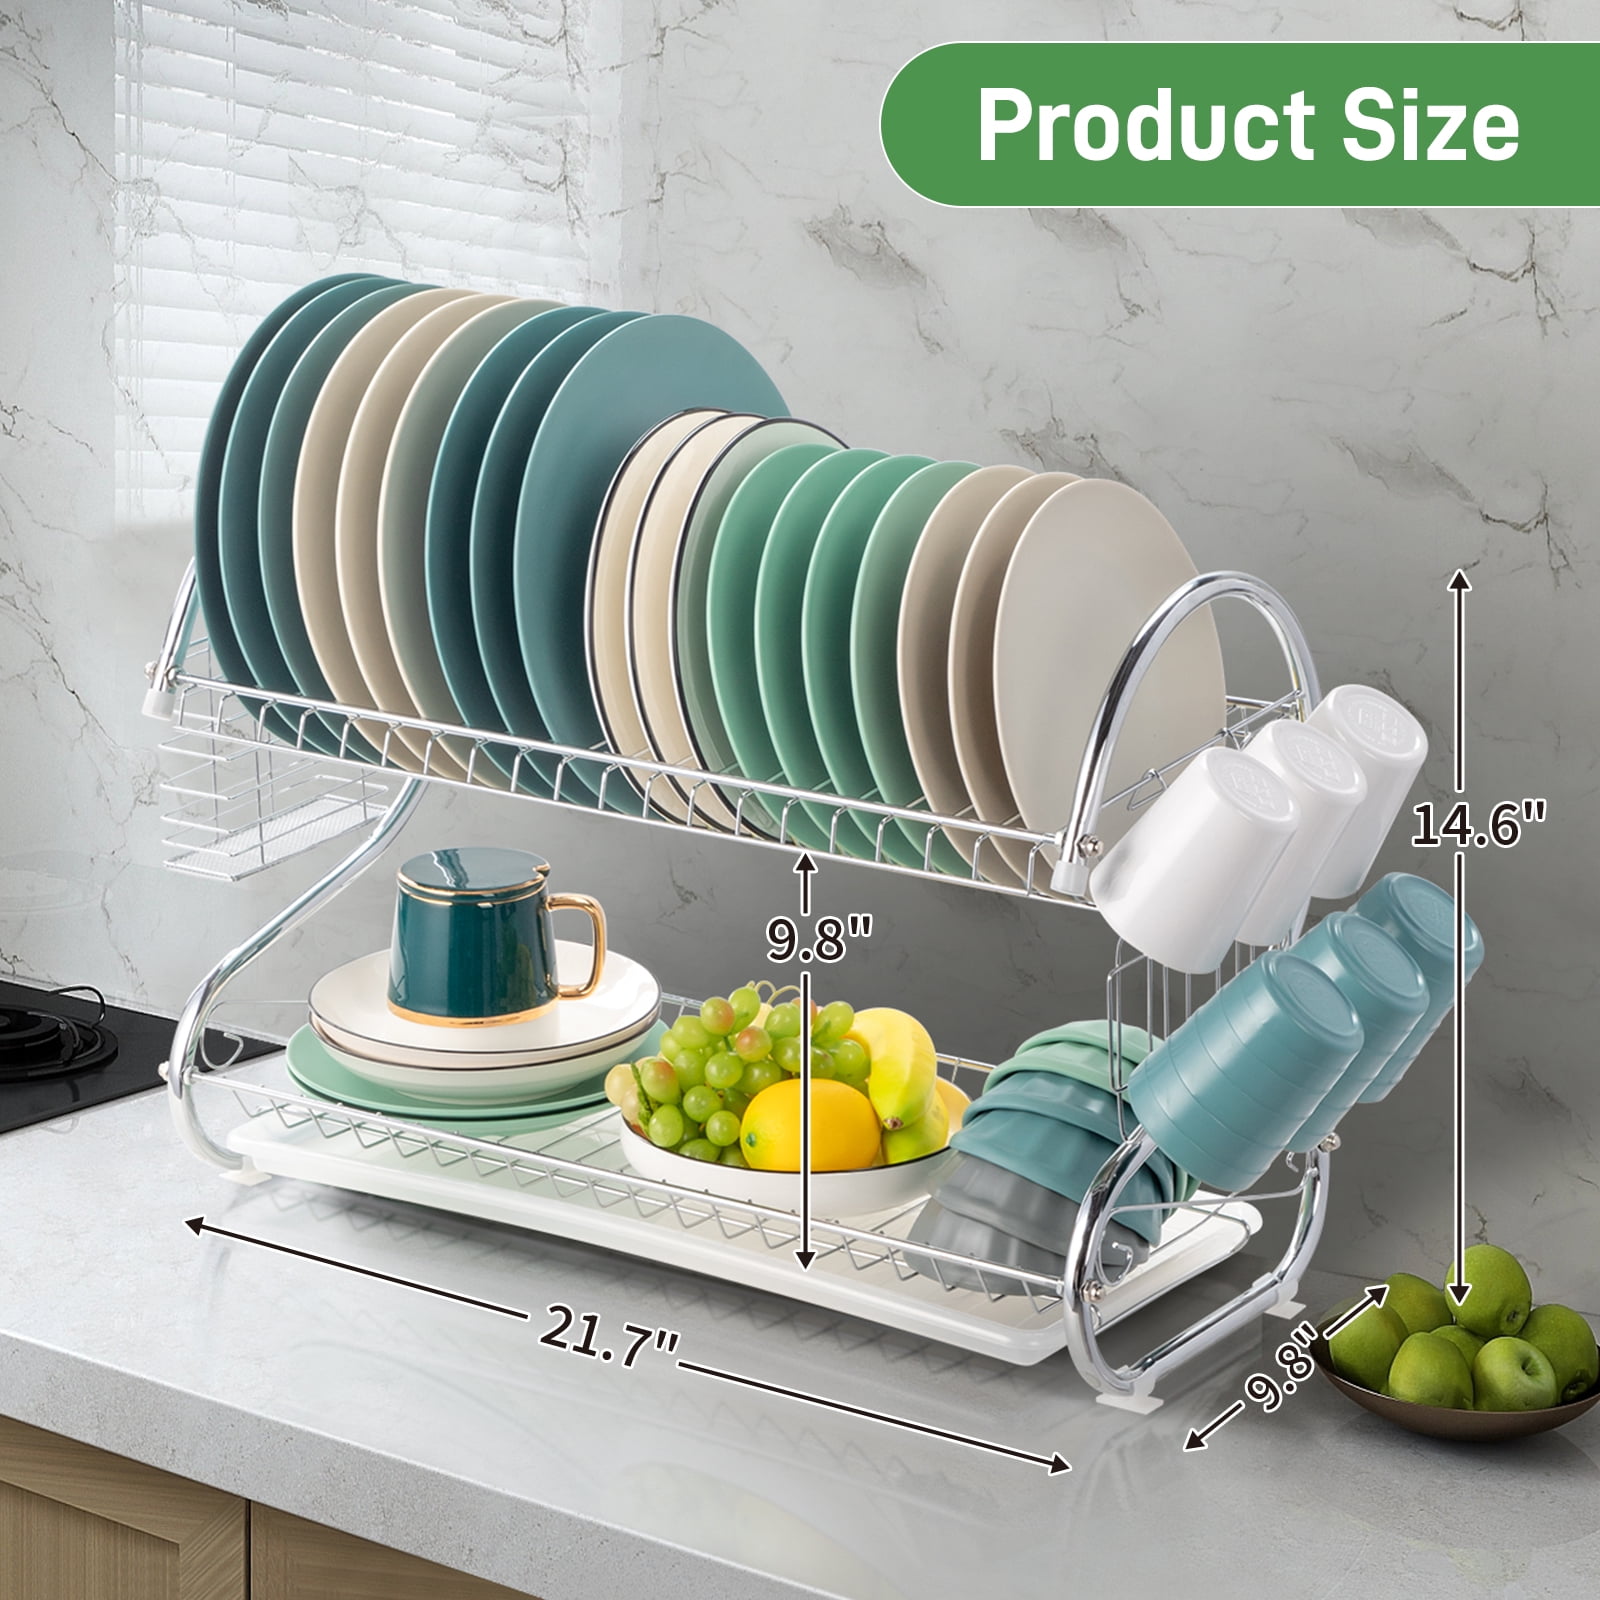 GOFLAME Dish Drying Rack with Drainboard, 2-Tier Detachable Dish Rack with  360°Swivel Spout, Utensil Holder, Cup Holder, Large Capacity Dish Drainer